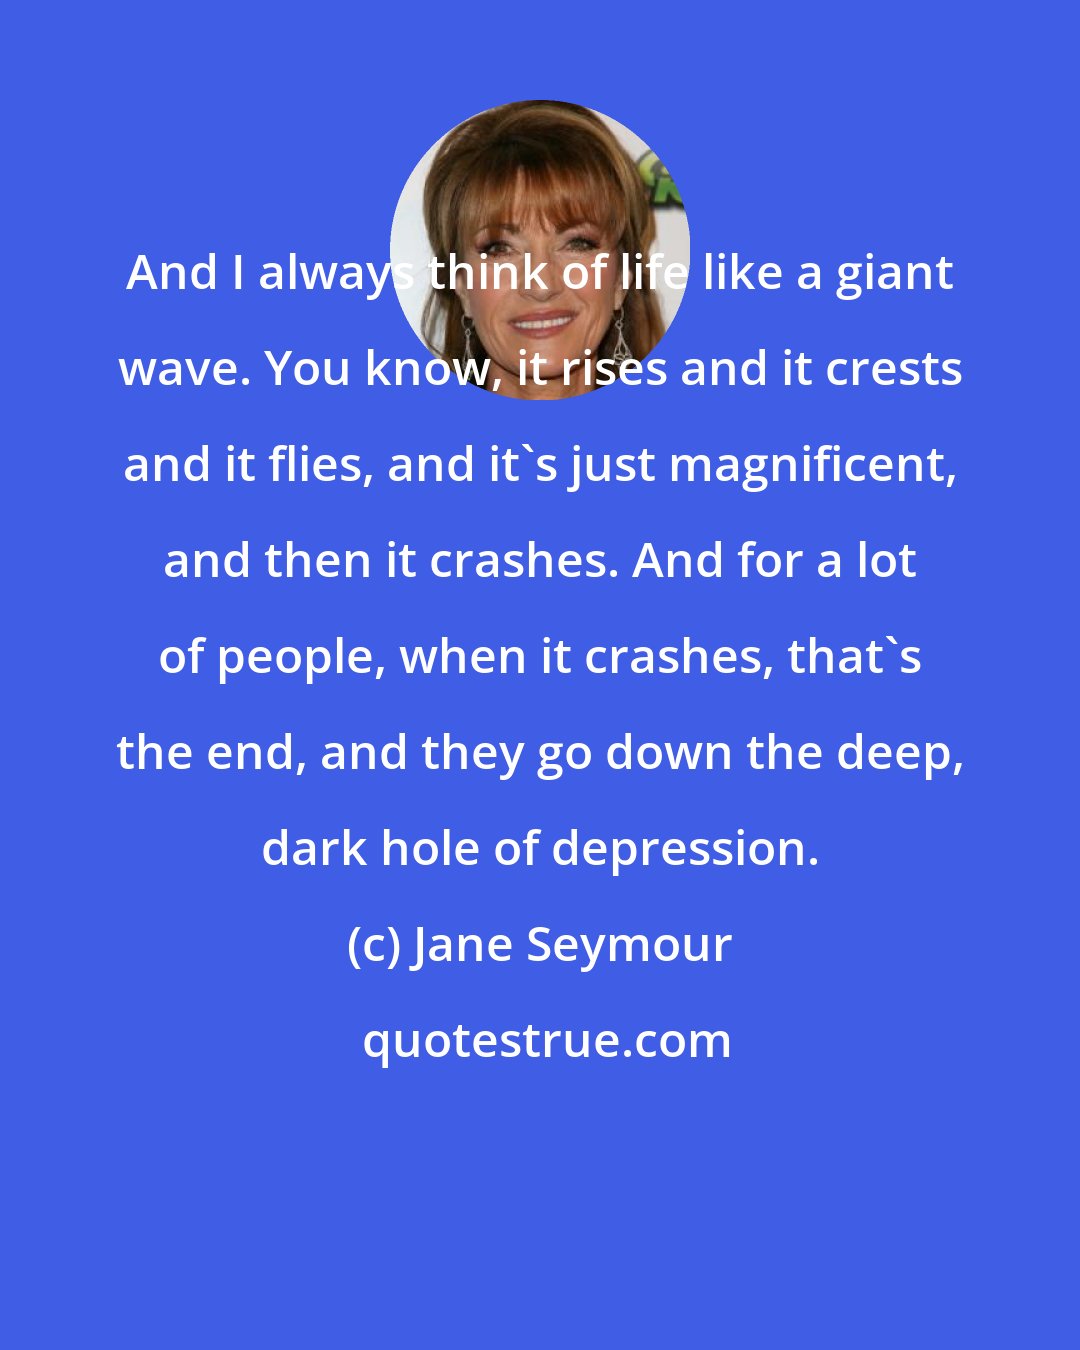 Jane Seymour: And I always think of life like a giant wave. You know, it rises and it crests and it flies, and it's just magnificent, and then it crashes. And for a lot of people, when it crashes, that's the end, and they go down the deep, dark hole of depression.